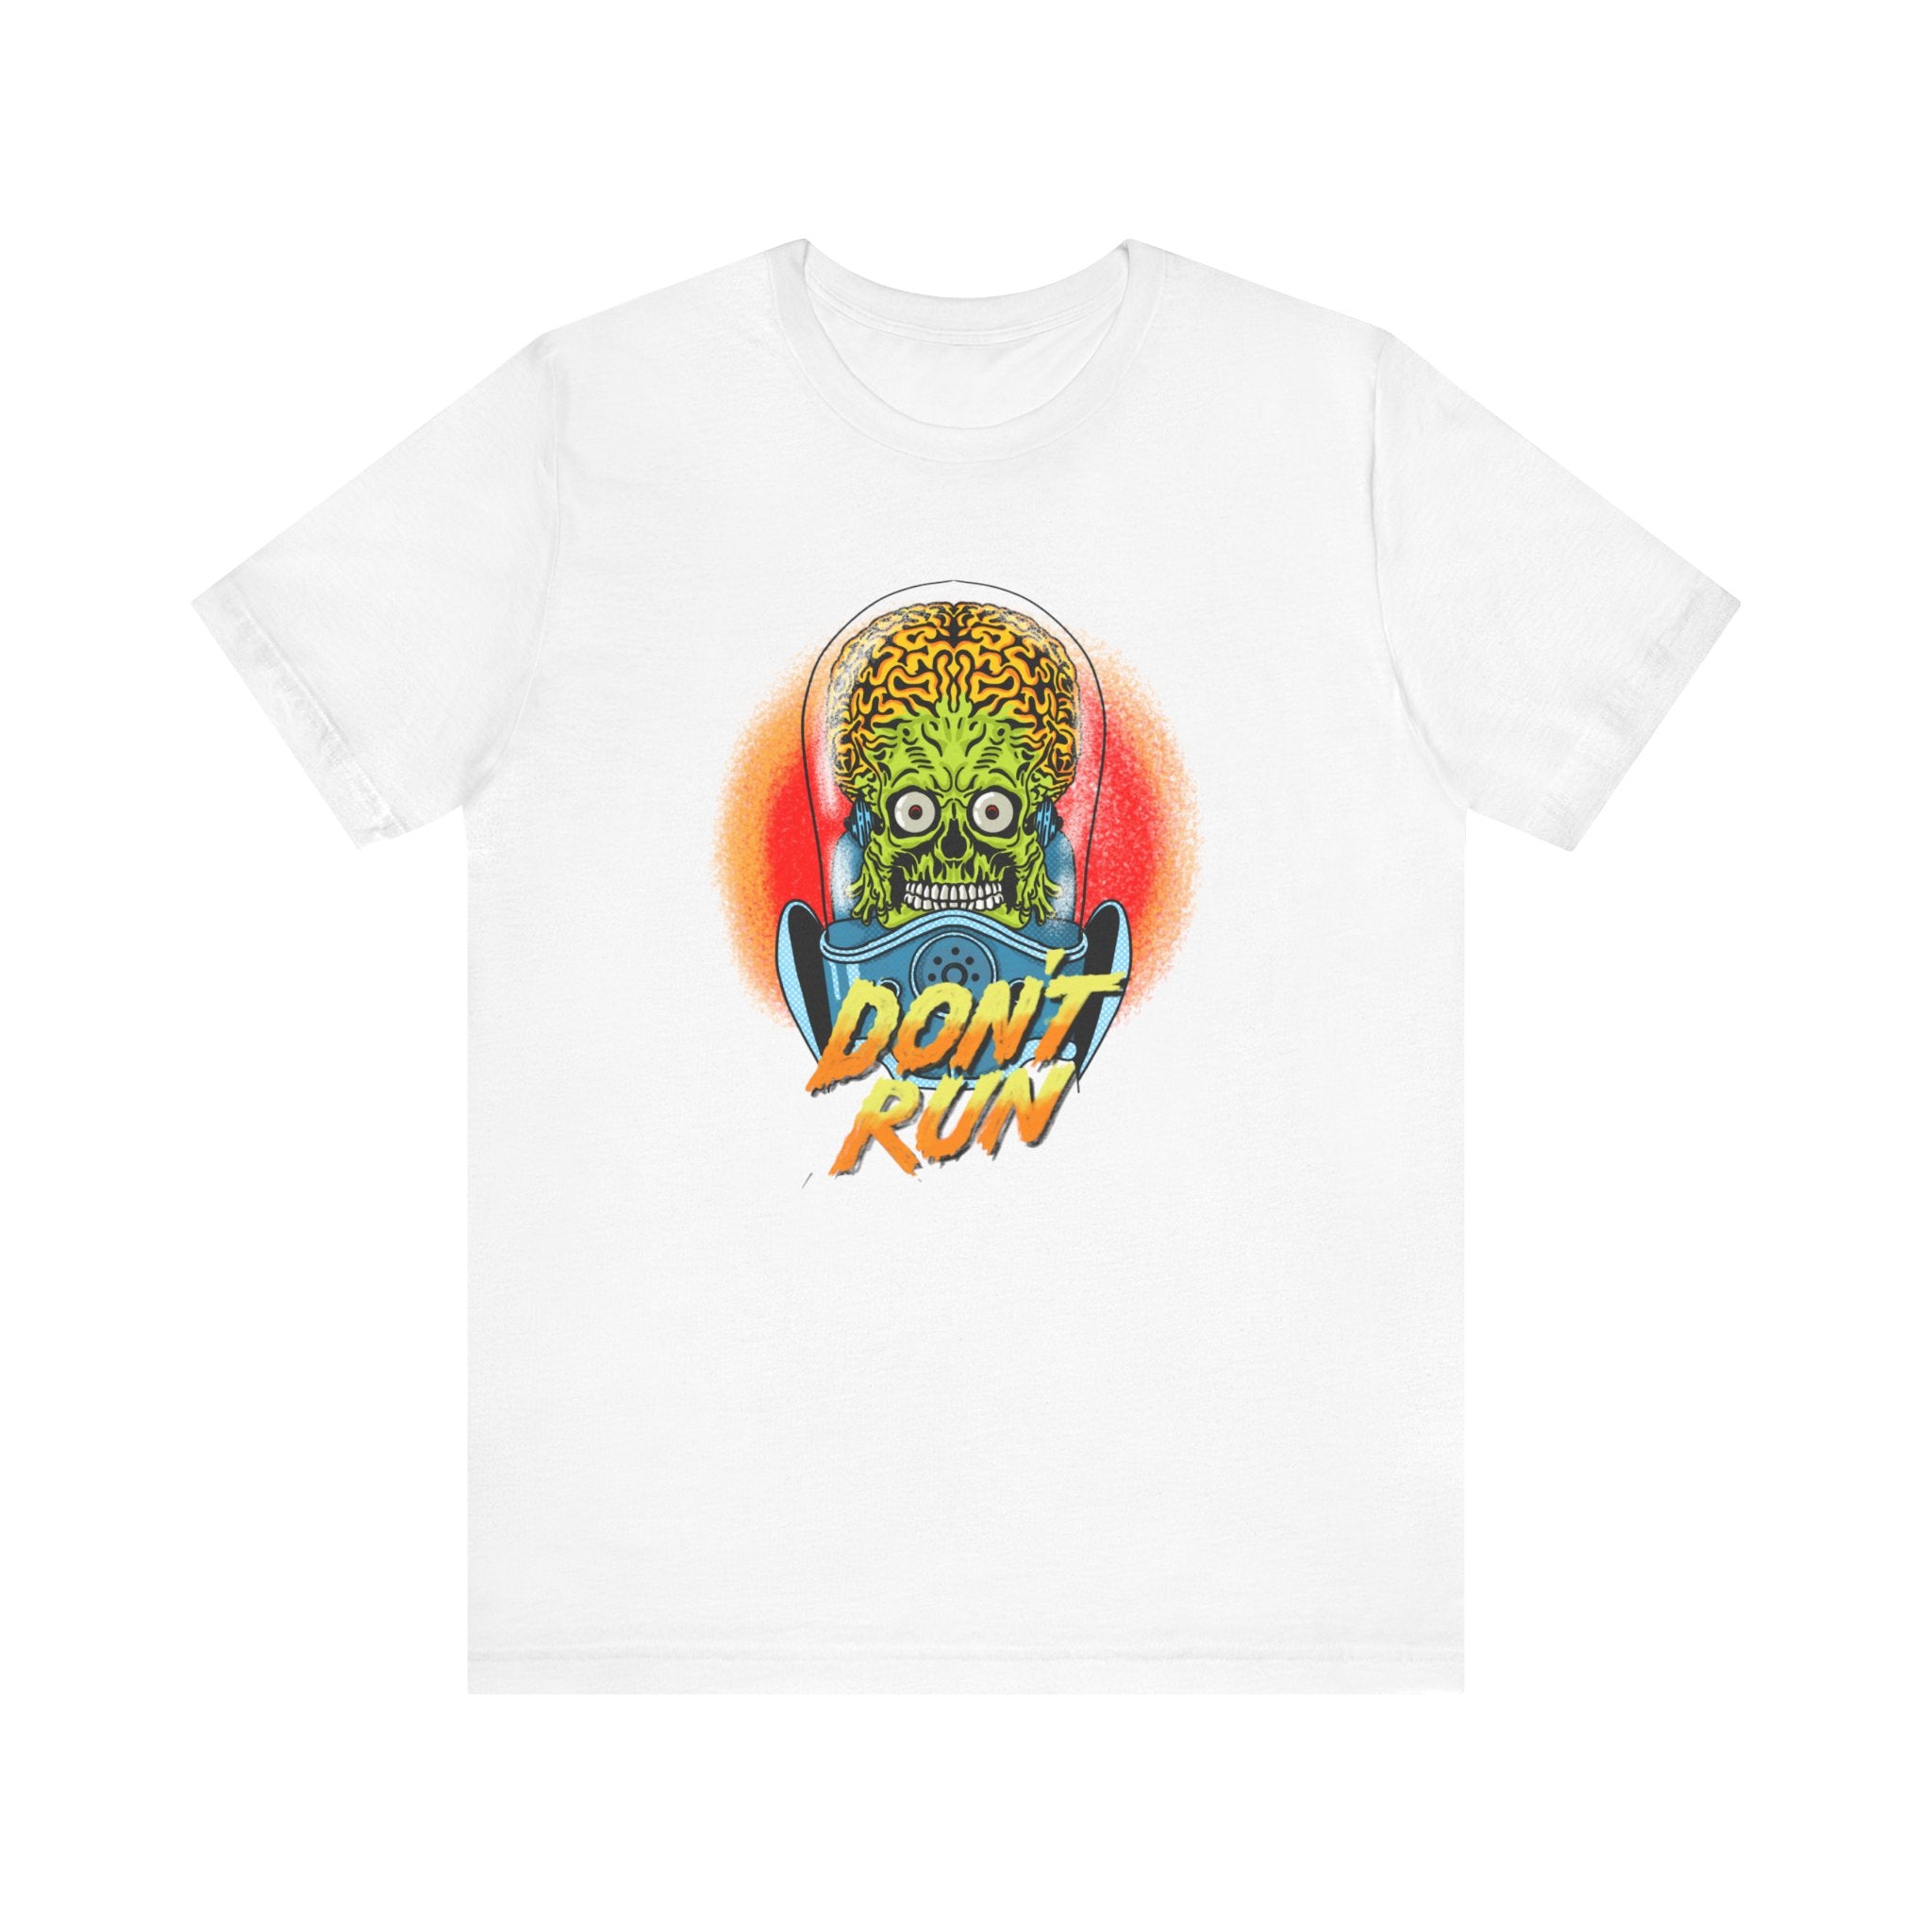 A white unisex Don't Run T-Shirt with a graphic design featuring a green skull with exposed brain and headphones, against an orange background, with the text "don't run" in blue.